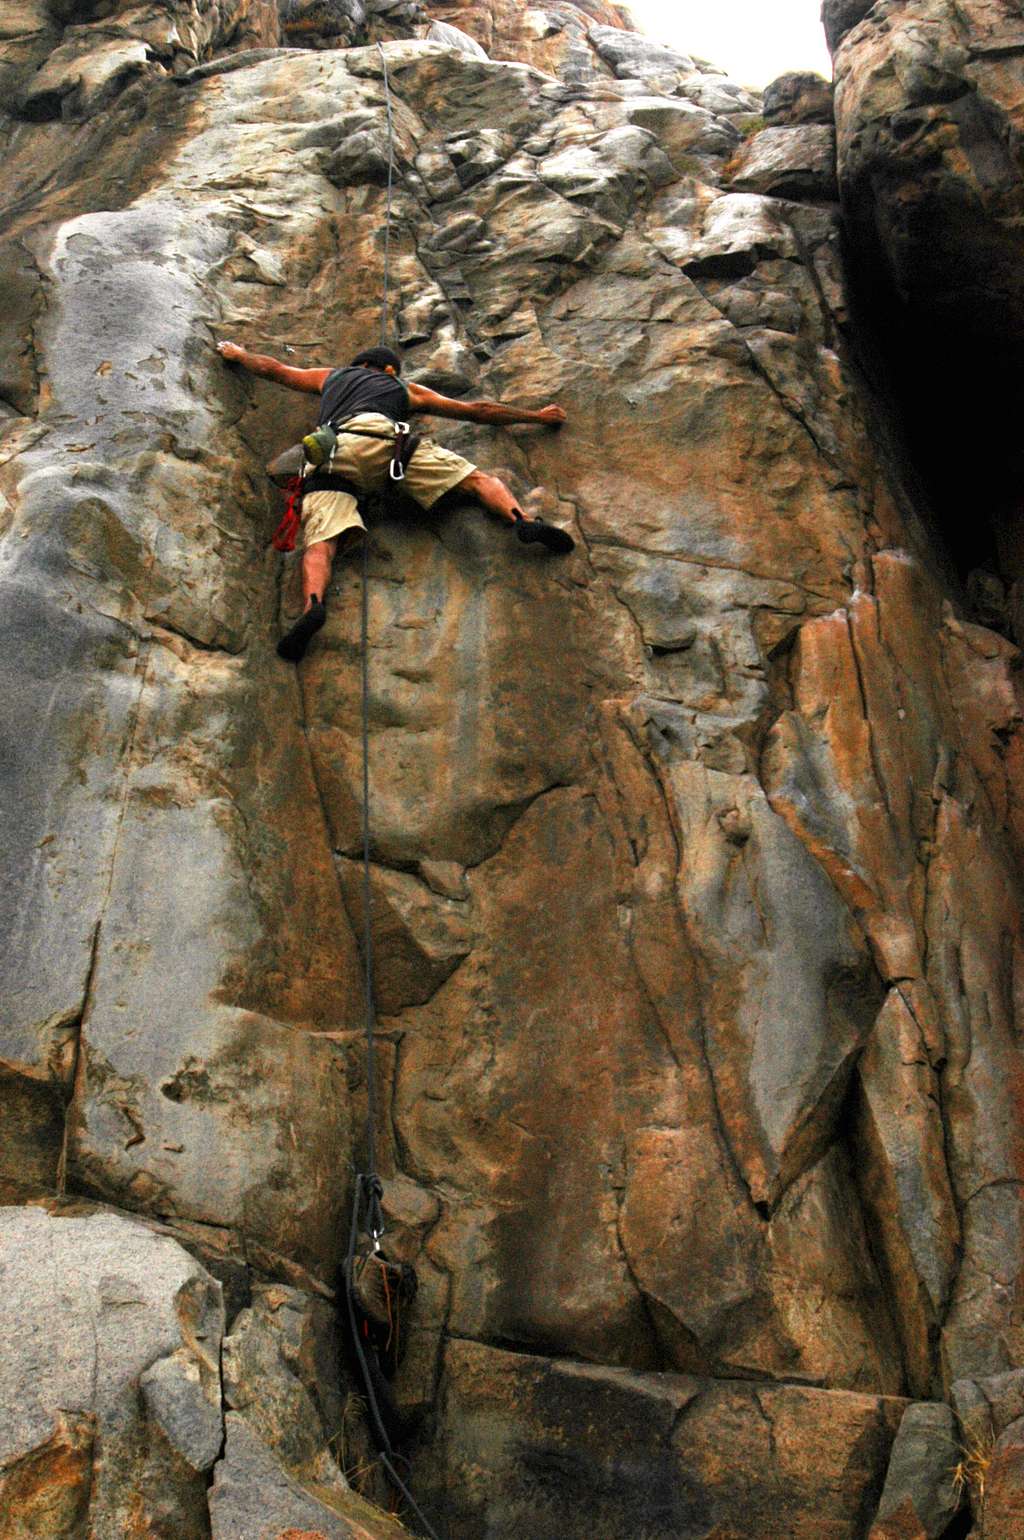 Roped solo of Master of De-Feet at Mission Gorge